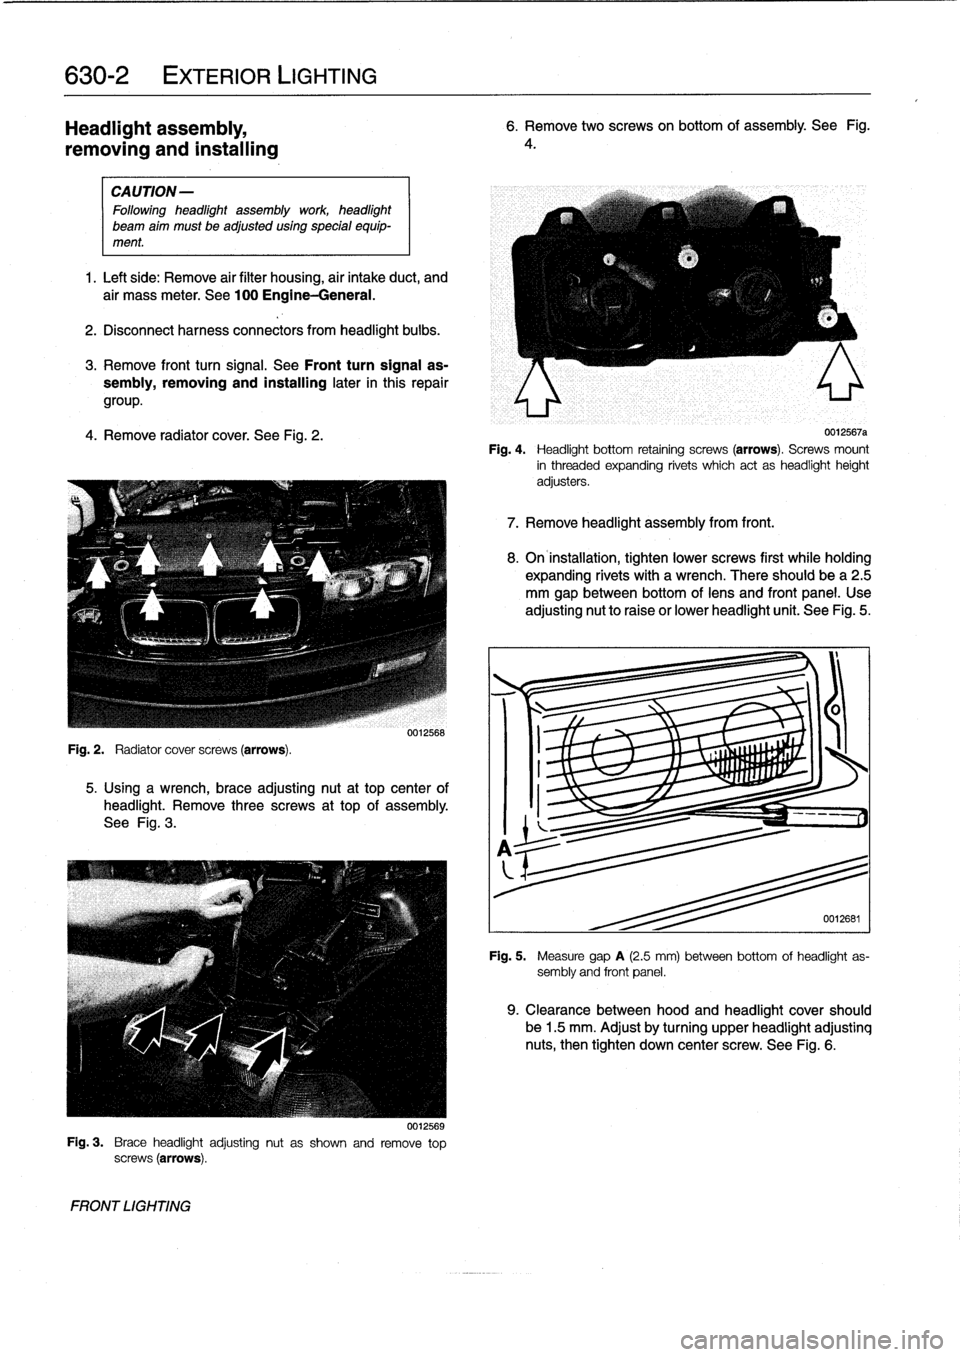 BMW 323i 1993 E36 Workshop Manual 
630-2

	

EXTERIOR
LIGHTING

Headlight
assembly,

removing
and
installing

CAUTION-

Followingheadlight
assembly
work
headlight

beam
aim
must
be
adjusted
using
special
equip-
ment
.

1
.
Left
side
: